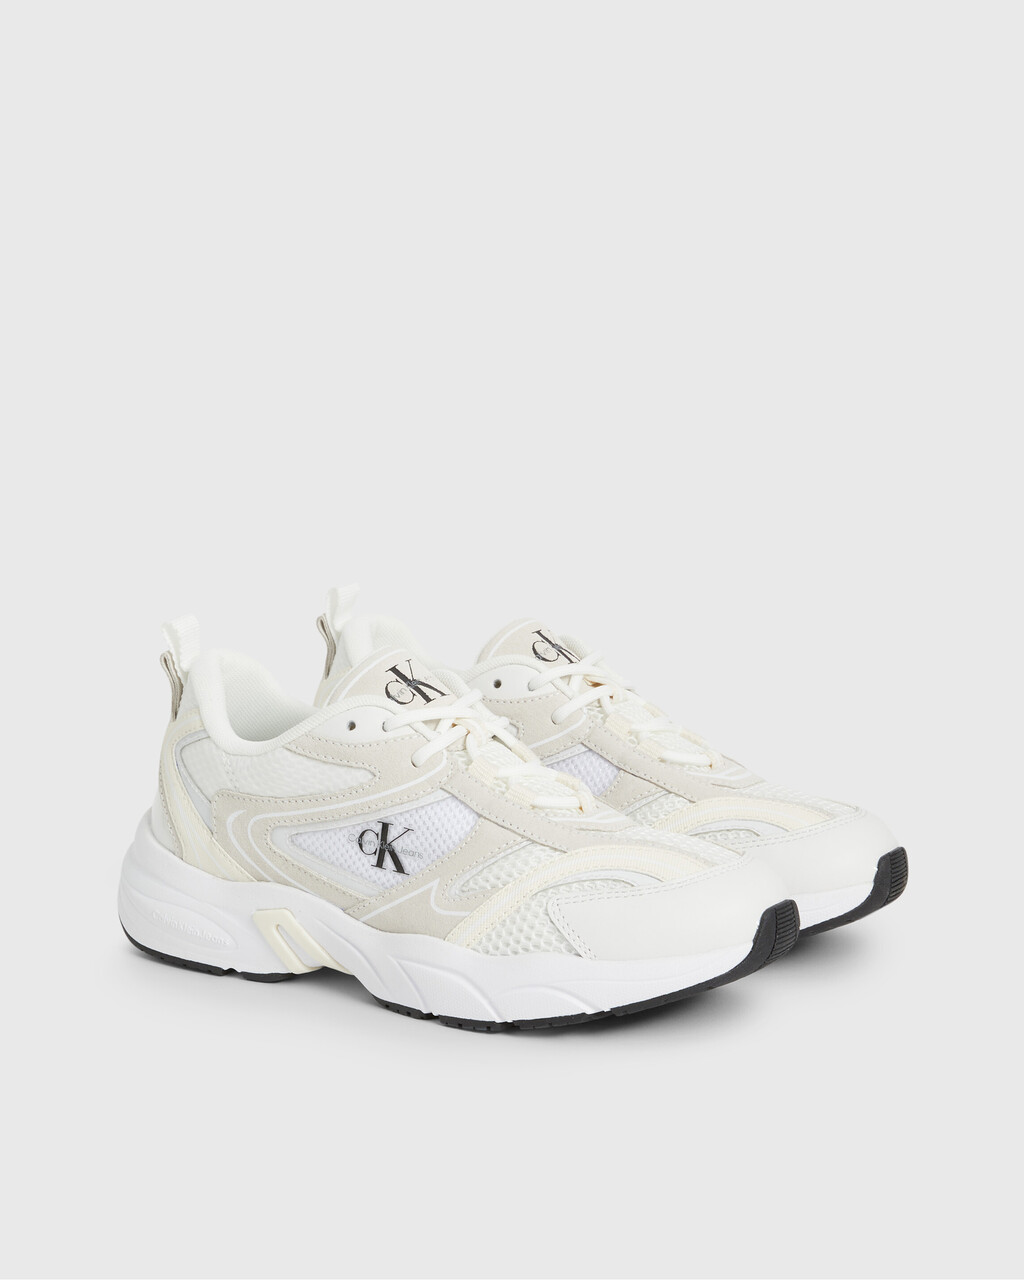 SUEDE AND MESH TRAINERS, White/Creamy White/Black, hi-res